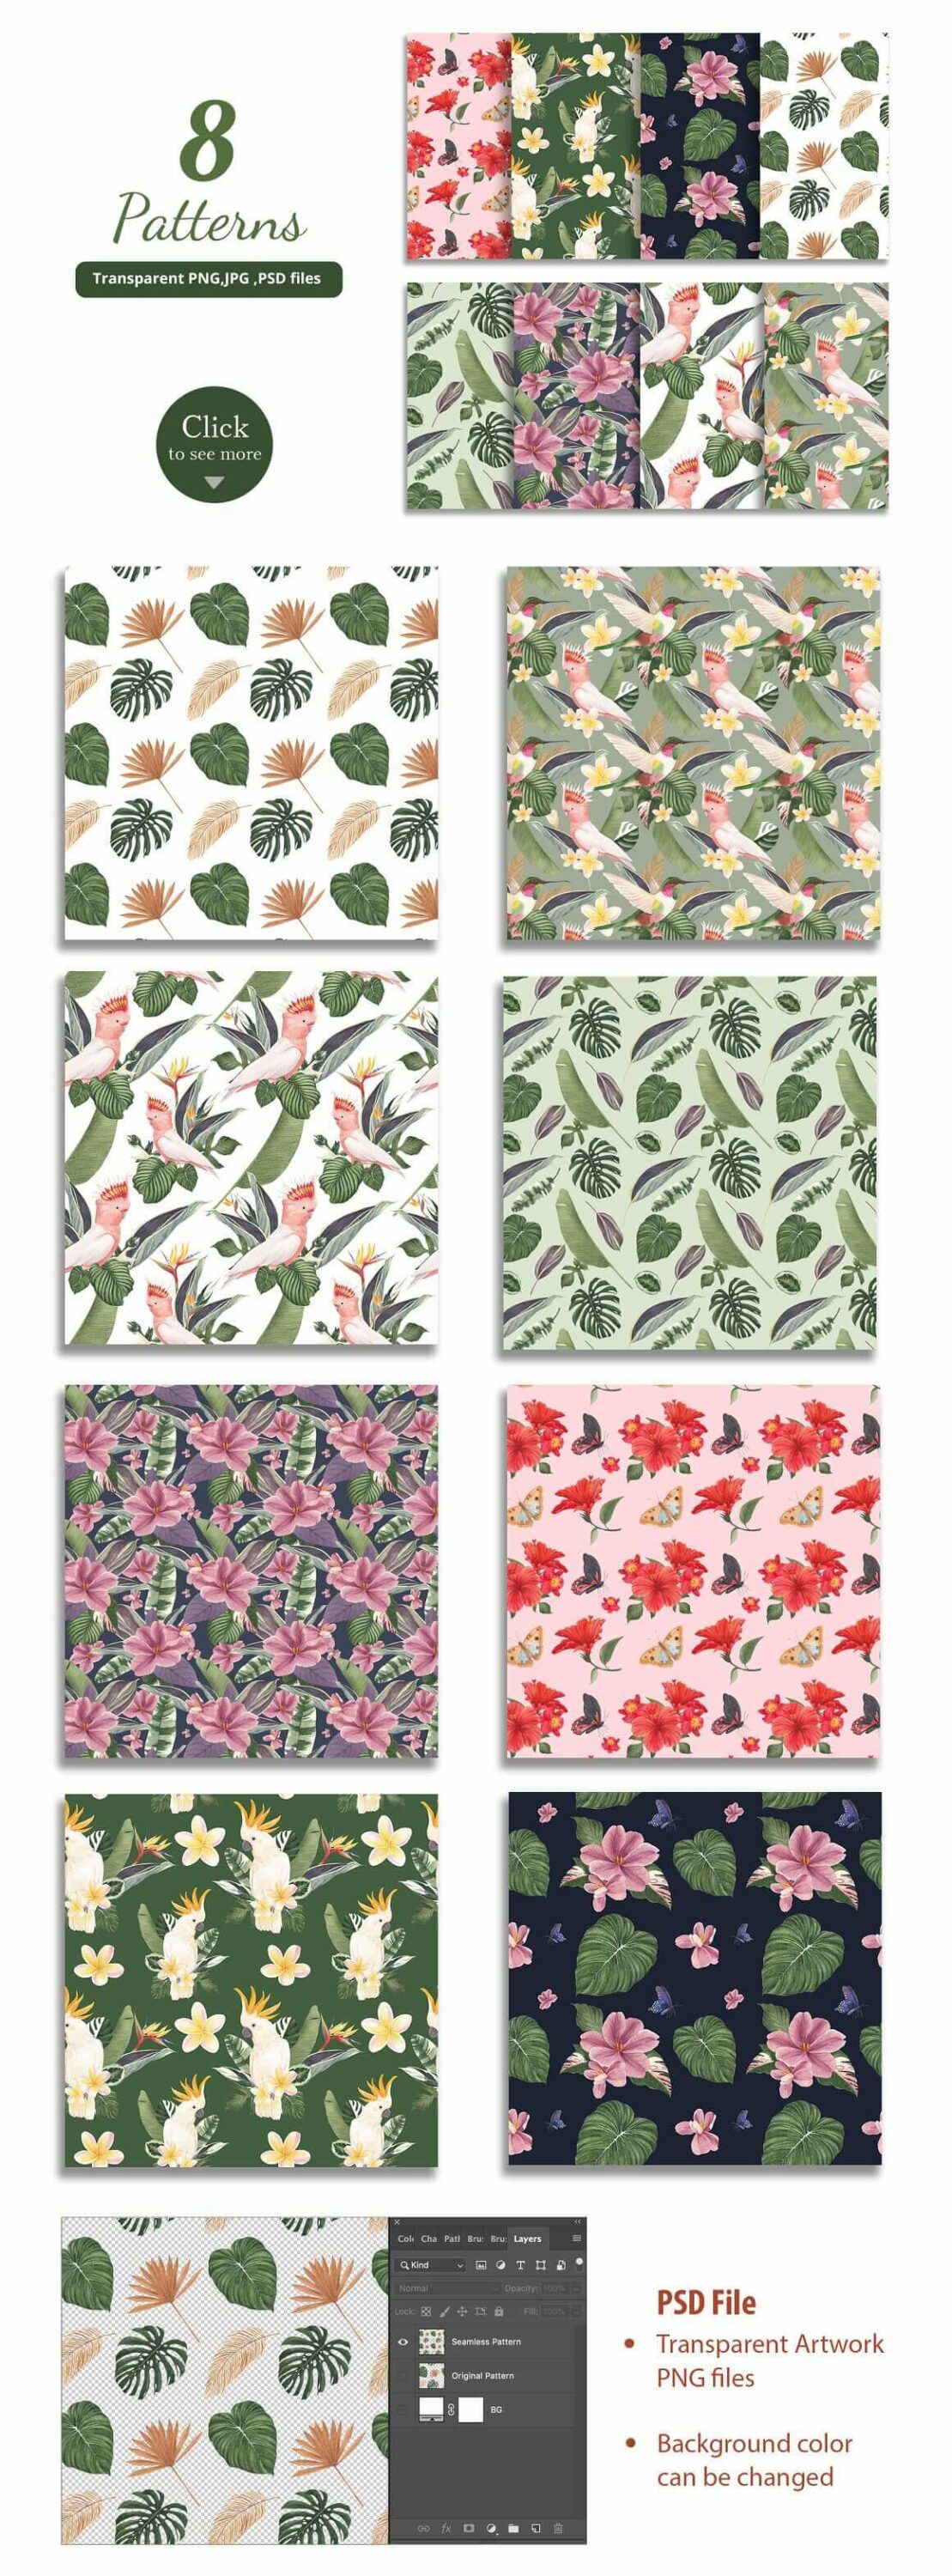 8 patterns with tropical design: leaves, flowers and wild birds.